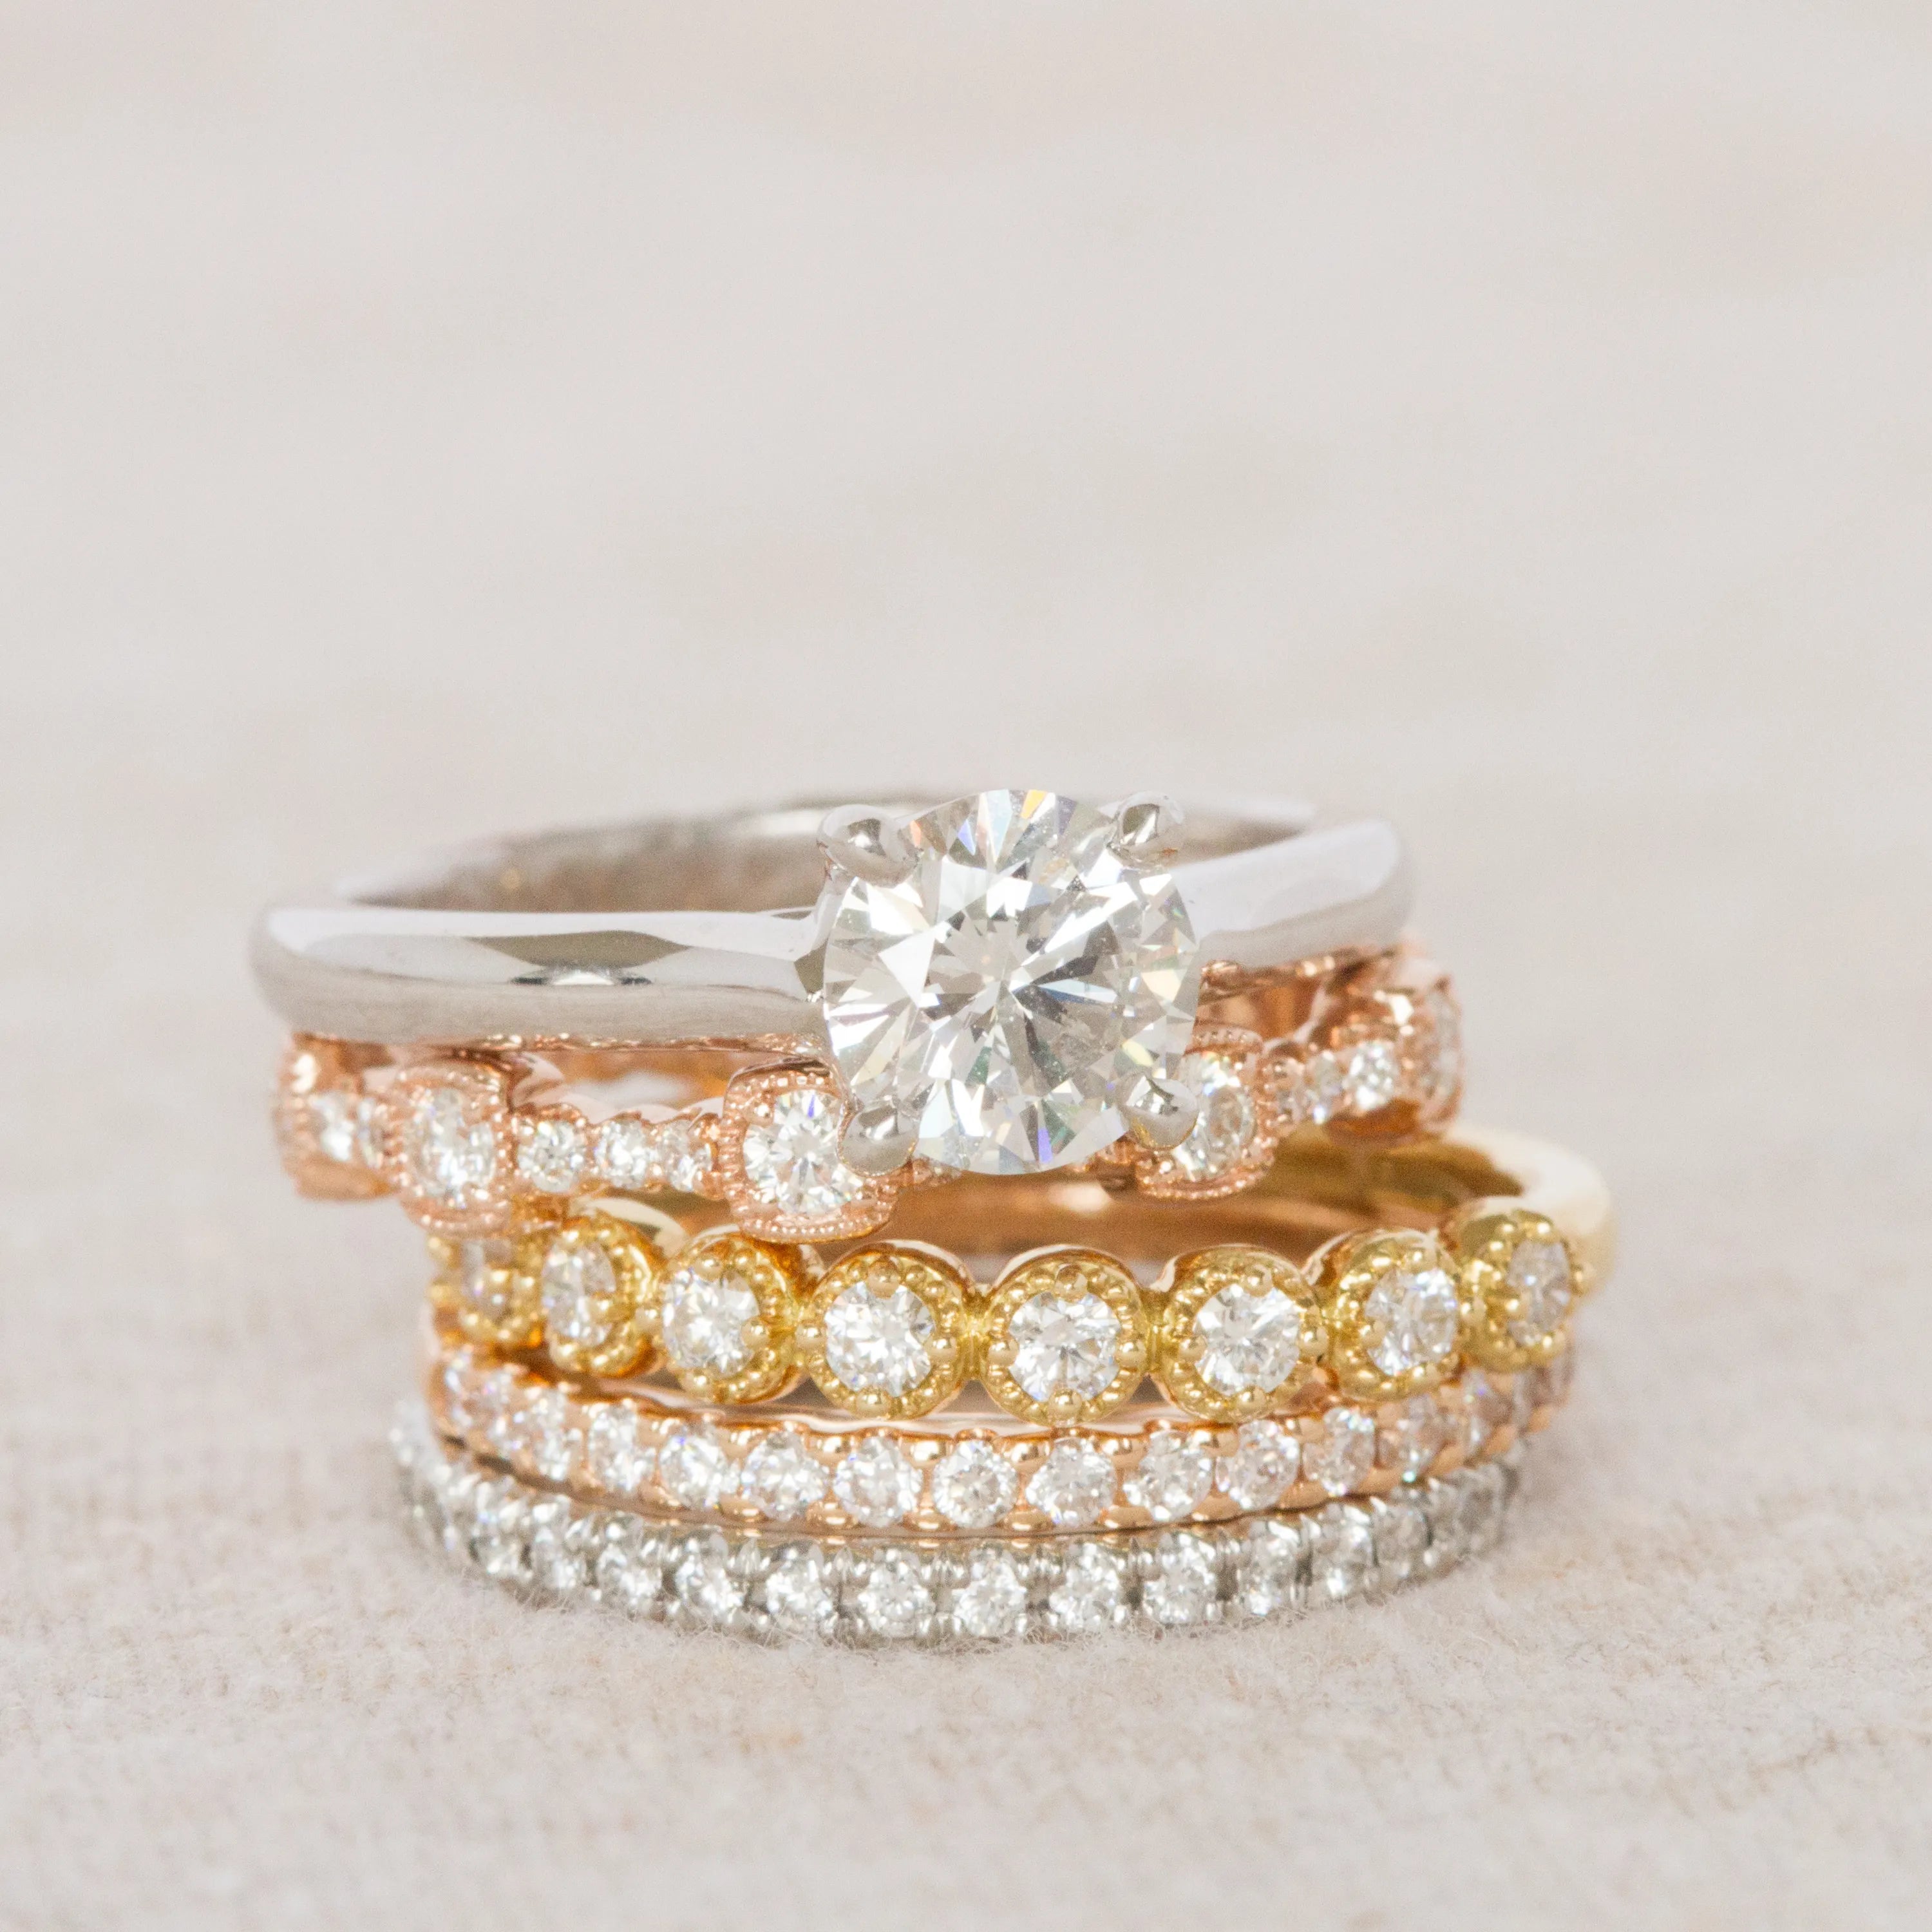 How to Upgrade Your Engagement Ring Without Feeling Guilty